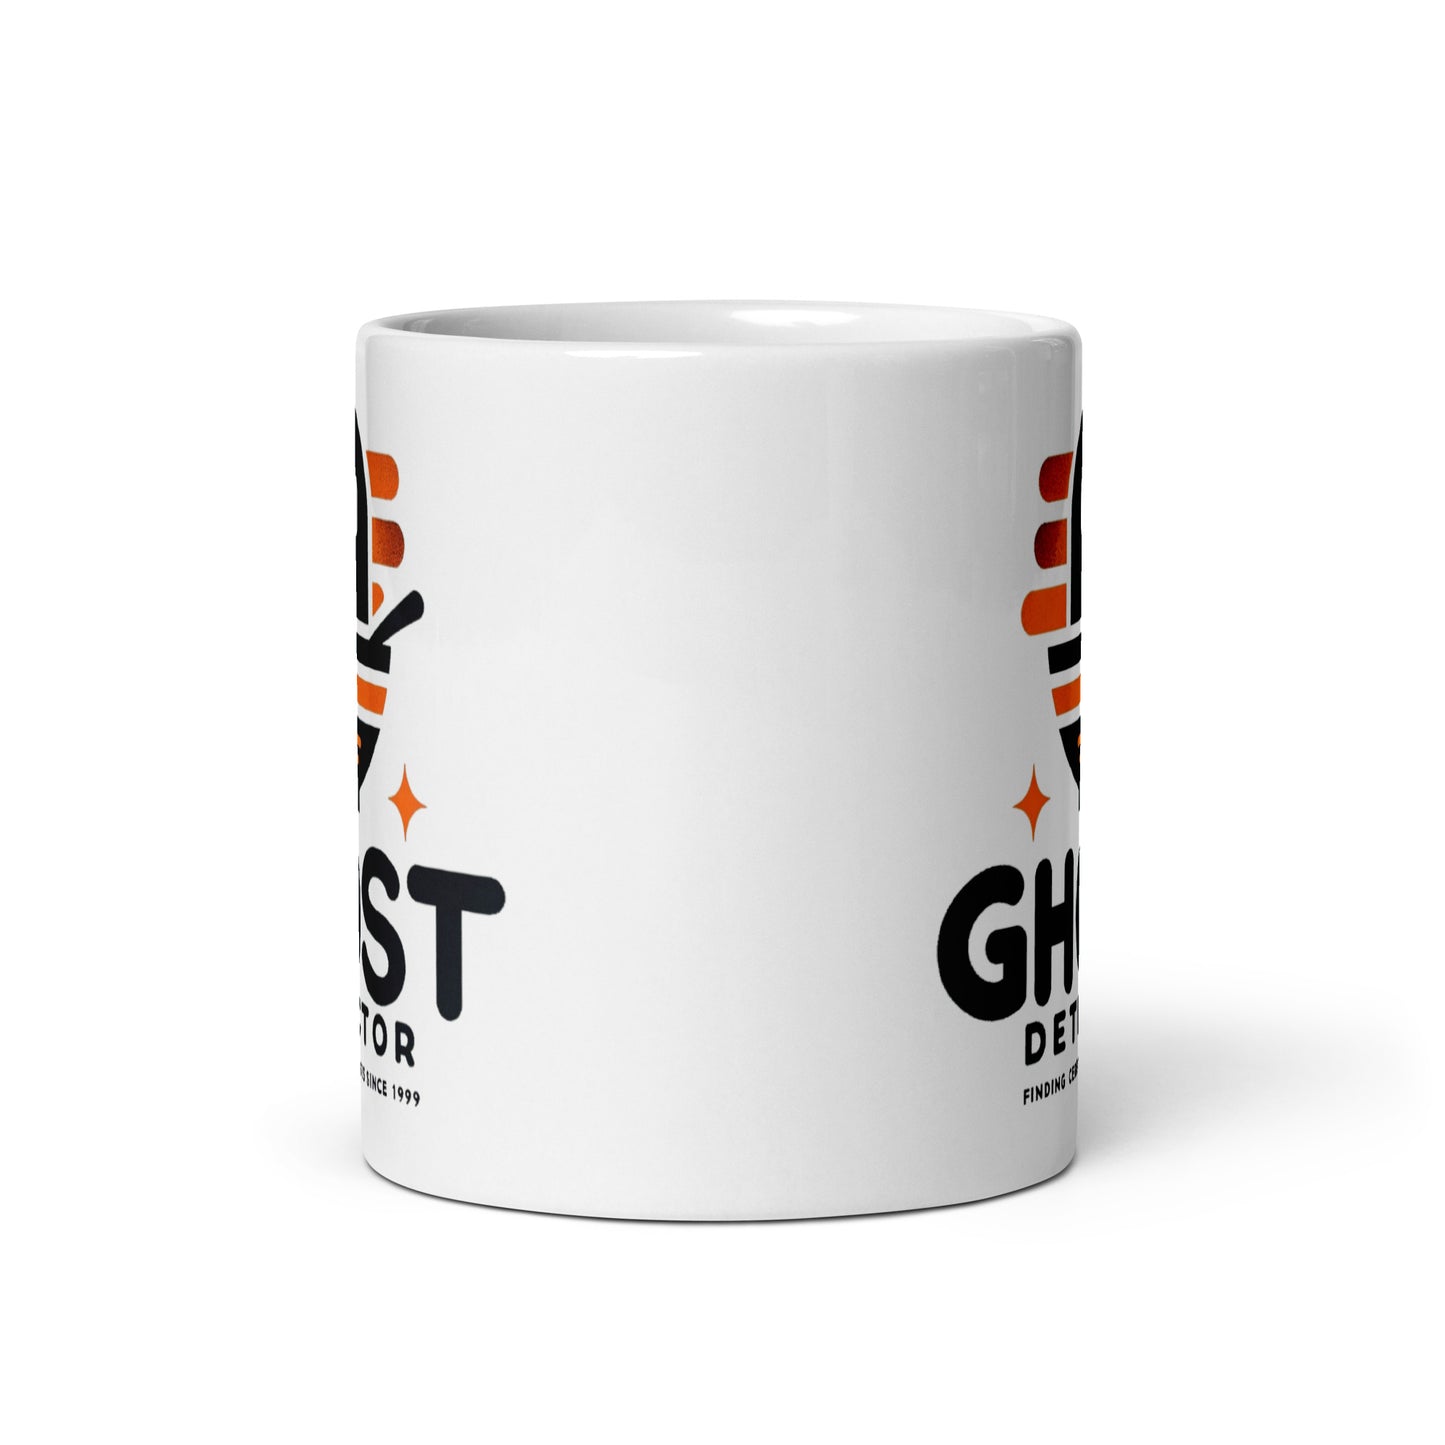 Spooky Finds with Ghost Detector - Uncover the Paranormal in Style Since 1999 White glossy mug